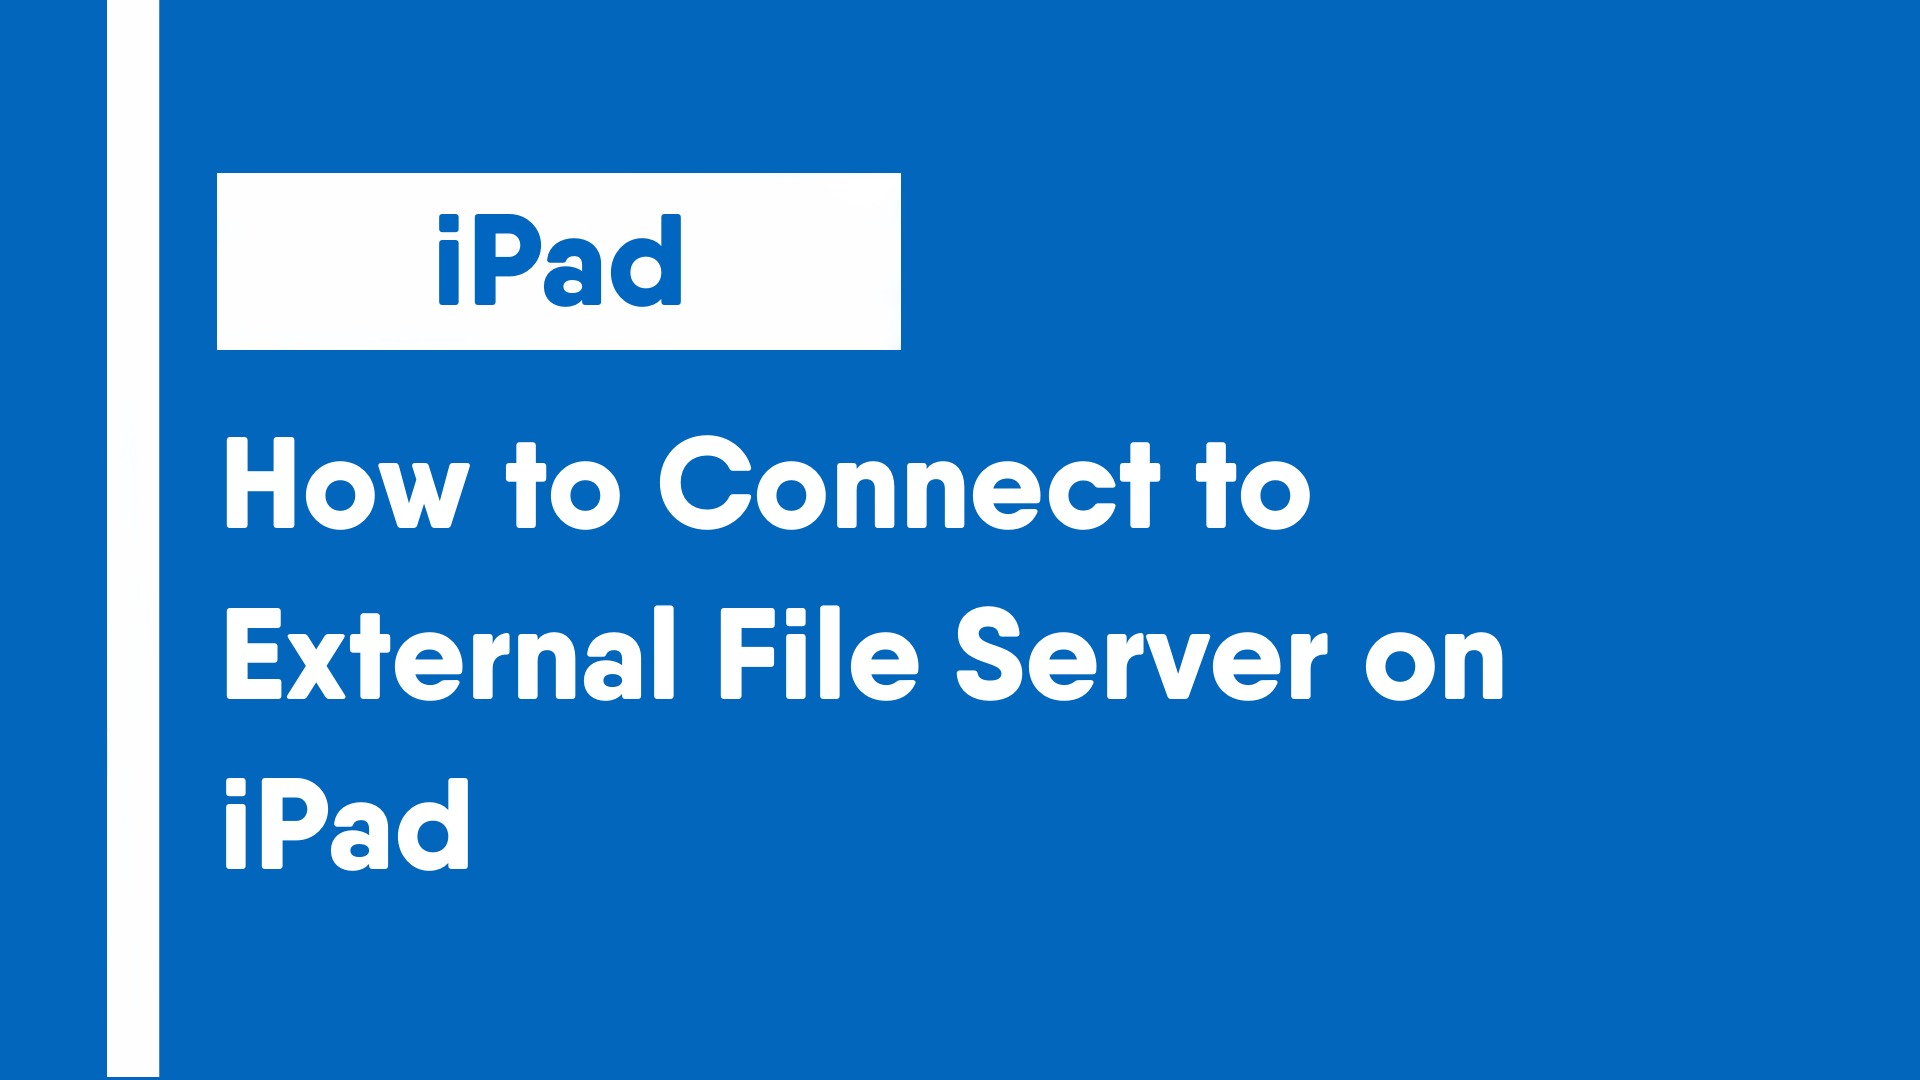 How to Connect to External File Server on iPad